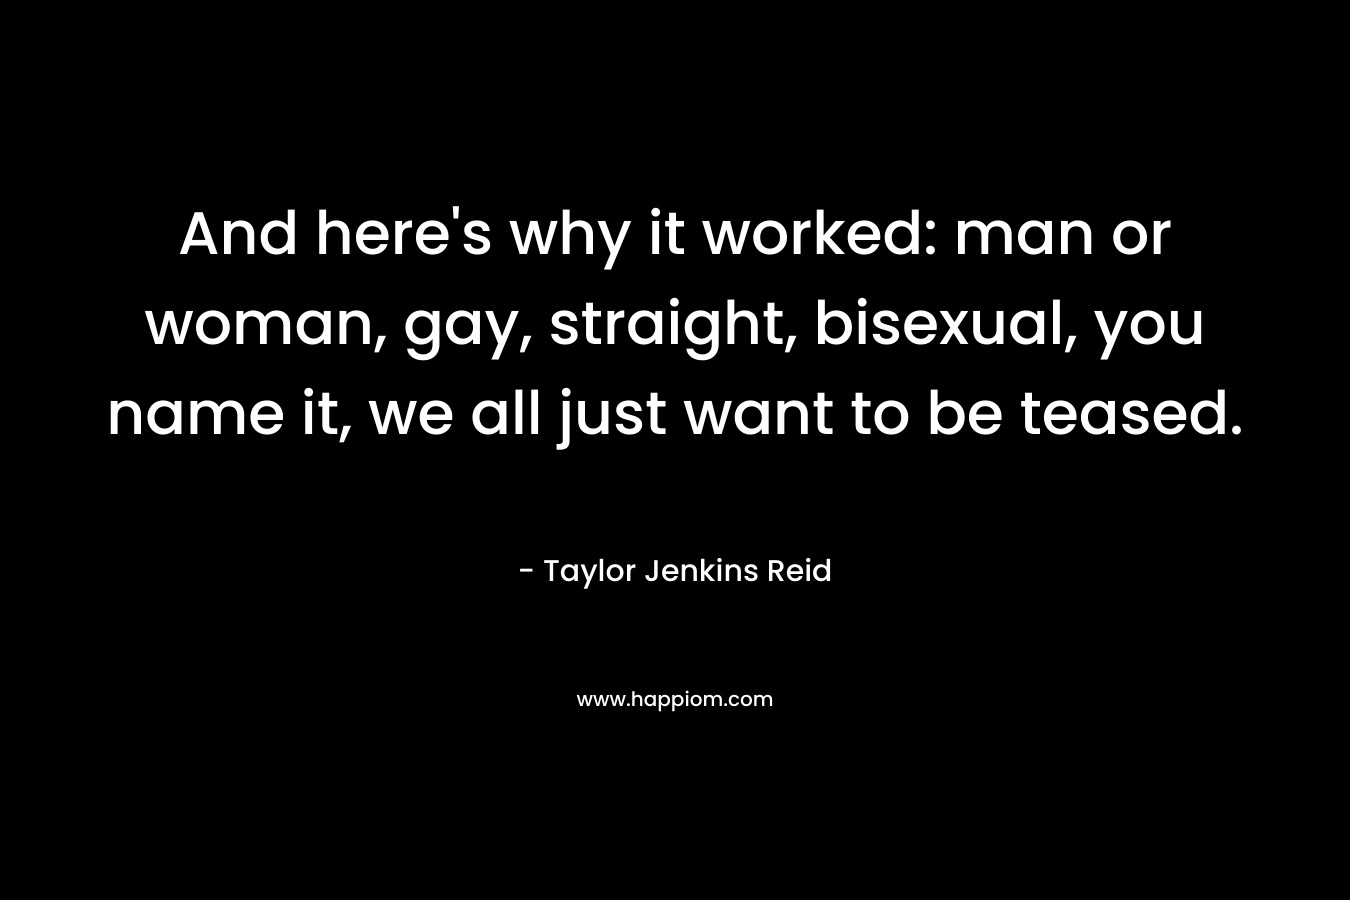 And here’s why it worked: man or woman, gay, straight, bisexual, you name it, we all just want to be teased. – Taylor Jenkins Reid